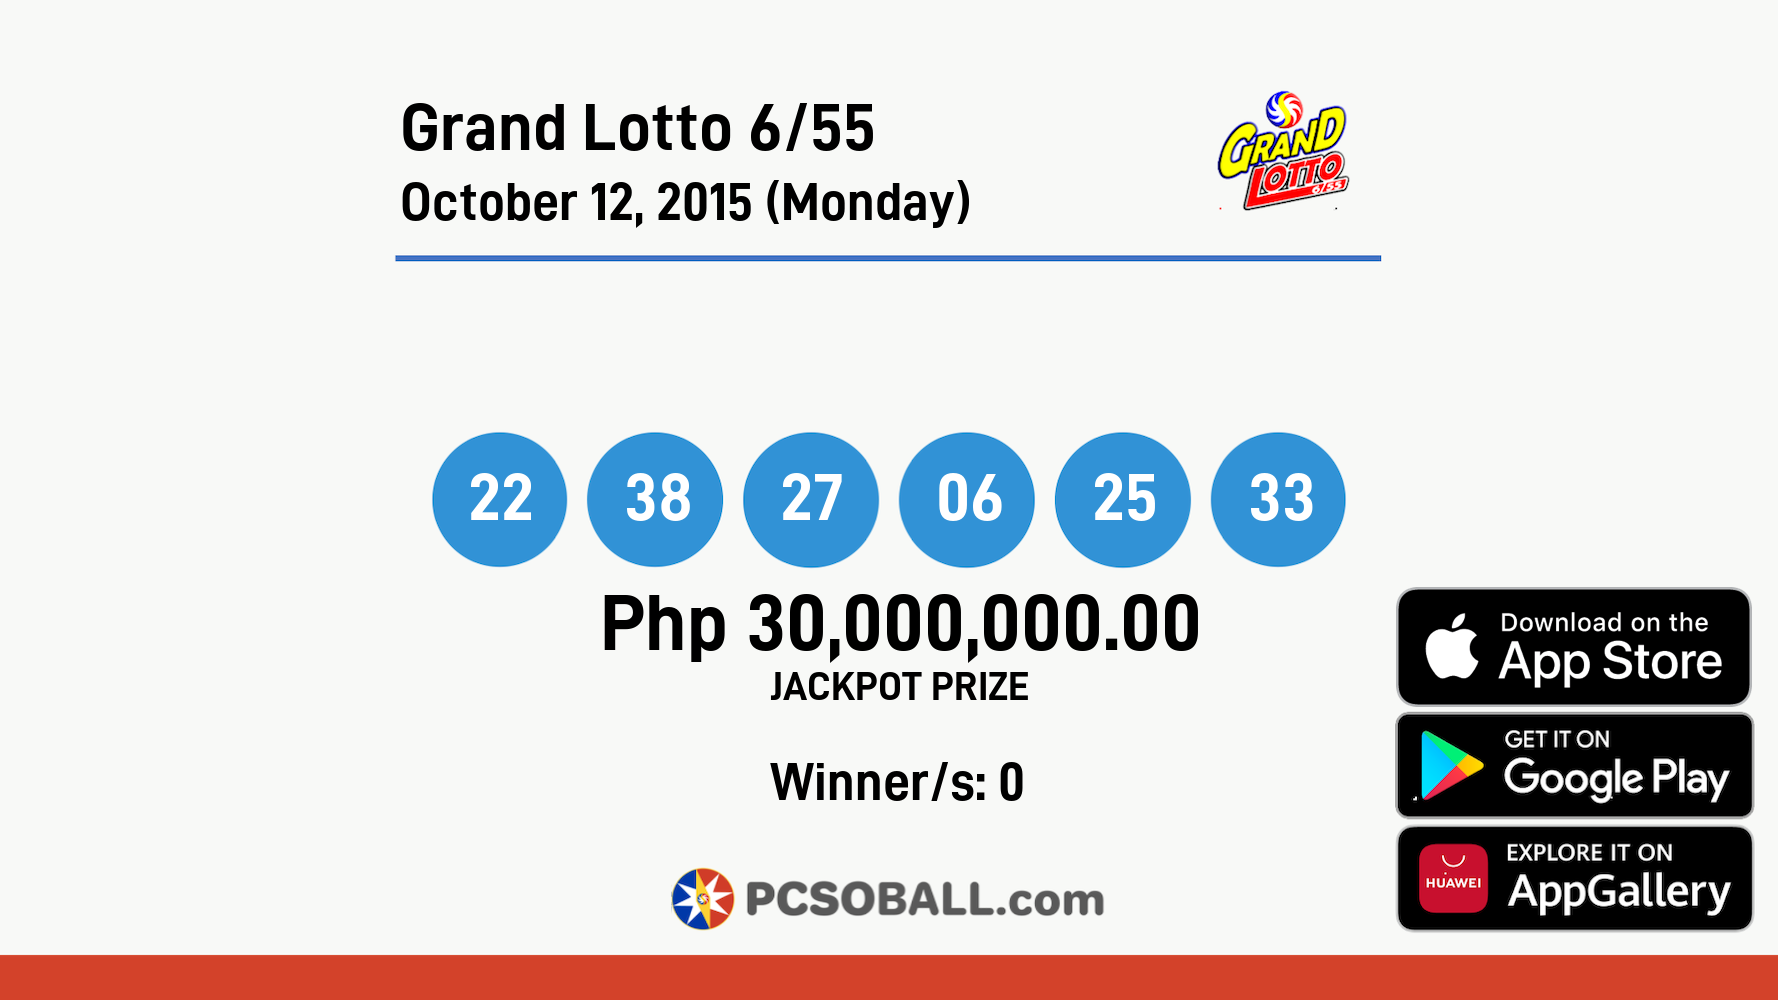 Grand Lotto 6/55 October 12, 2015 (Monday) Result